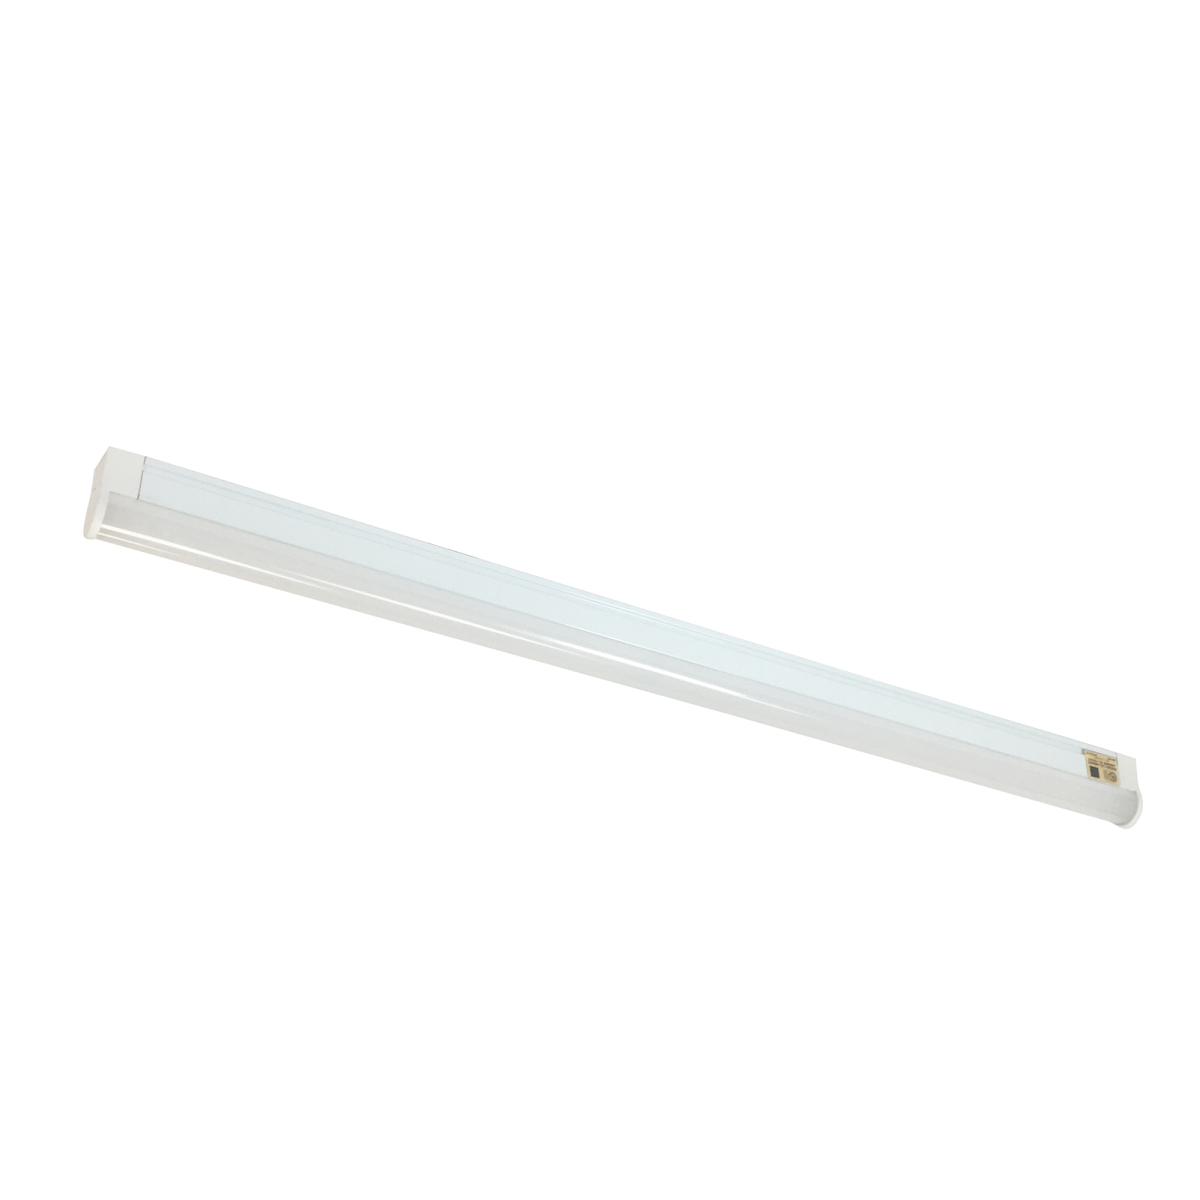 Picture of Nora Lighting NULS-LED1030W 10 in. 3000K Undercabinet Linear LED Fixture - White